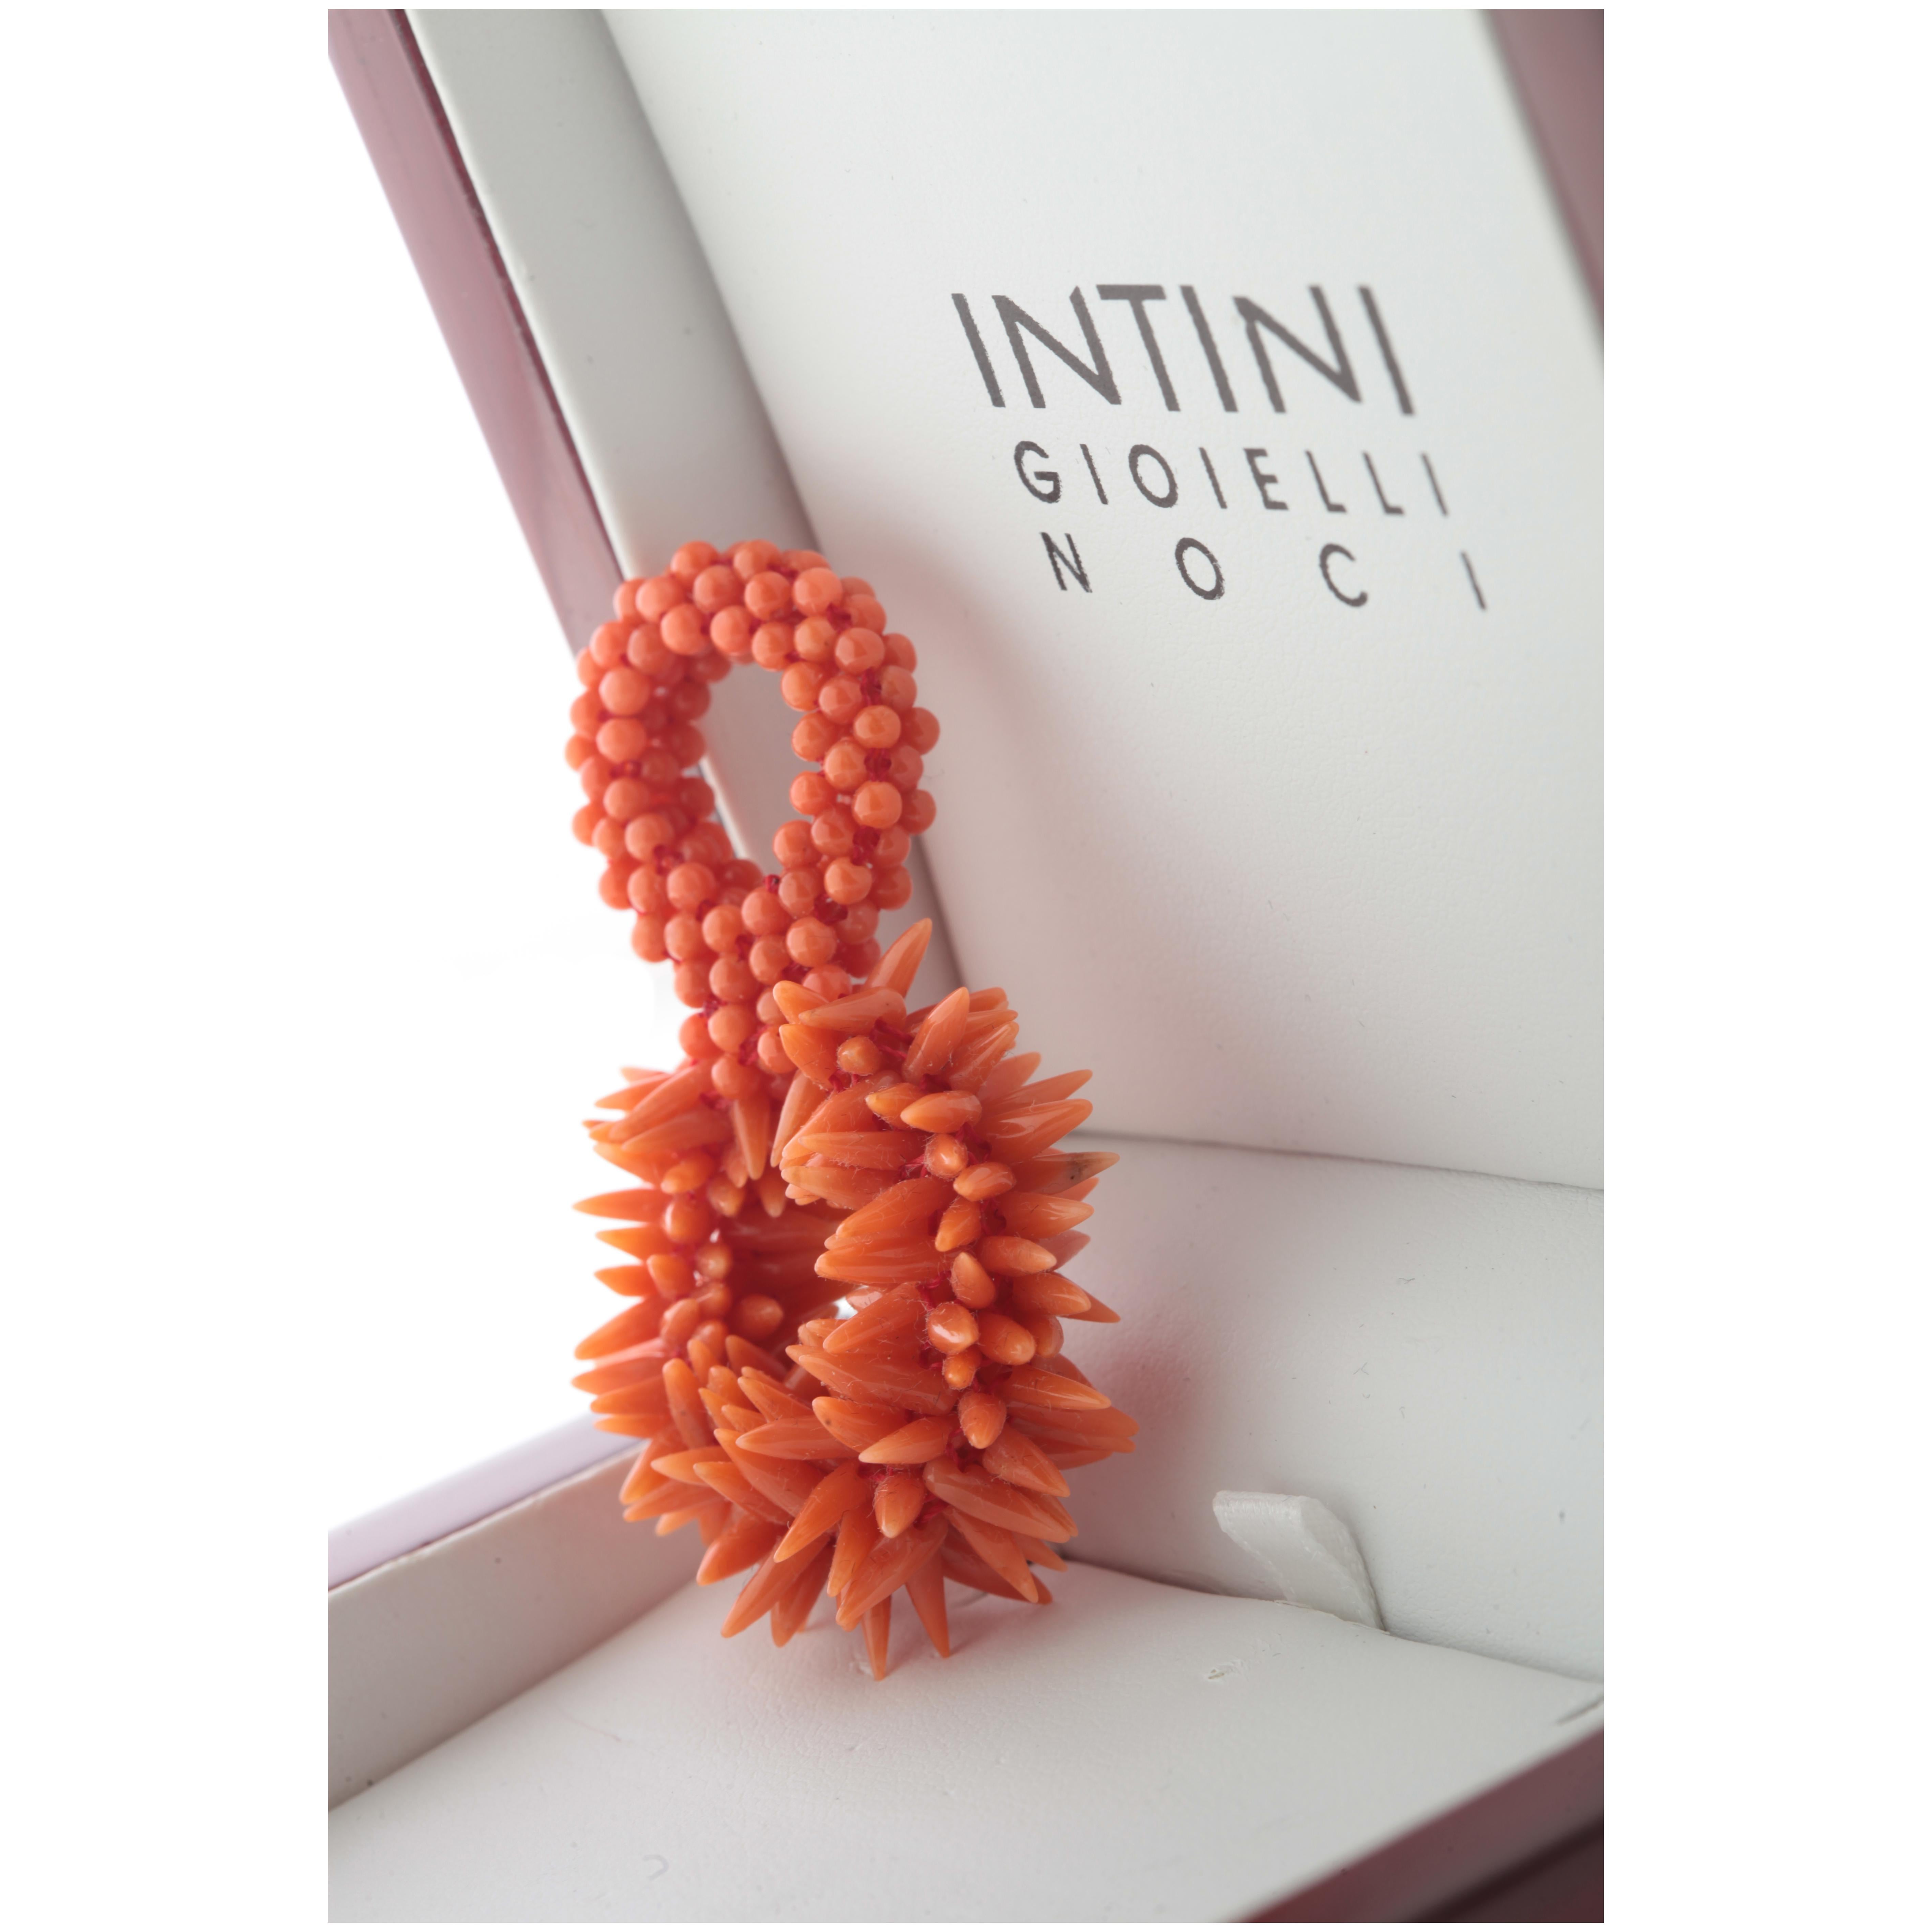 Stunning unique piece of Italian coral. Spheres and beads came together to create a unique and wonderful pendant. Mediterranean high quality coral.

Inspired by antique history. The belief may be traced to Greek mythology, which states that few